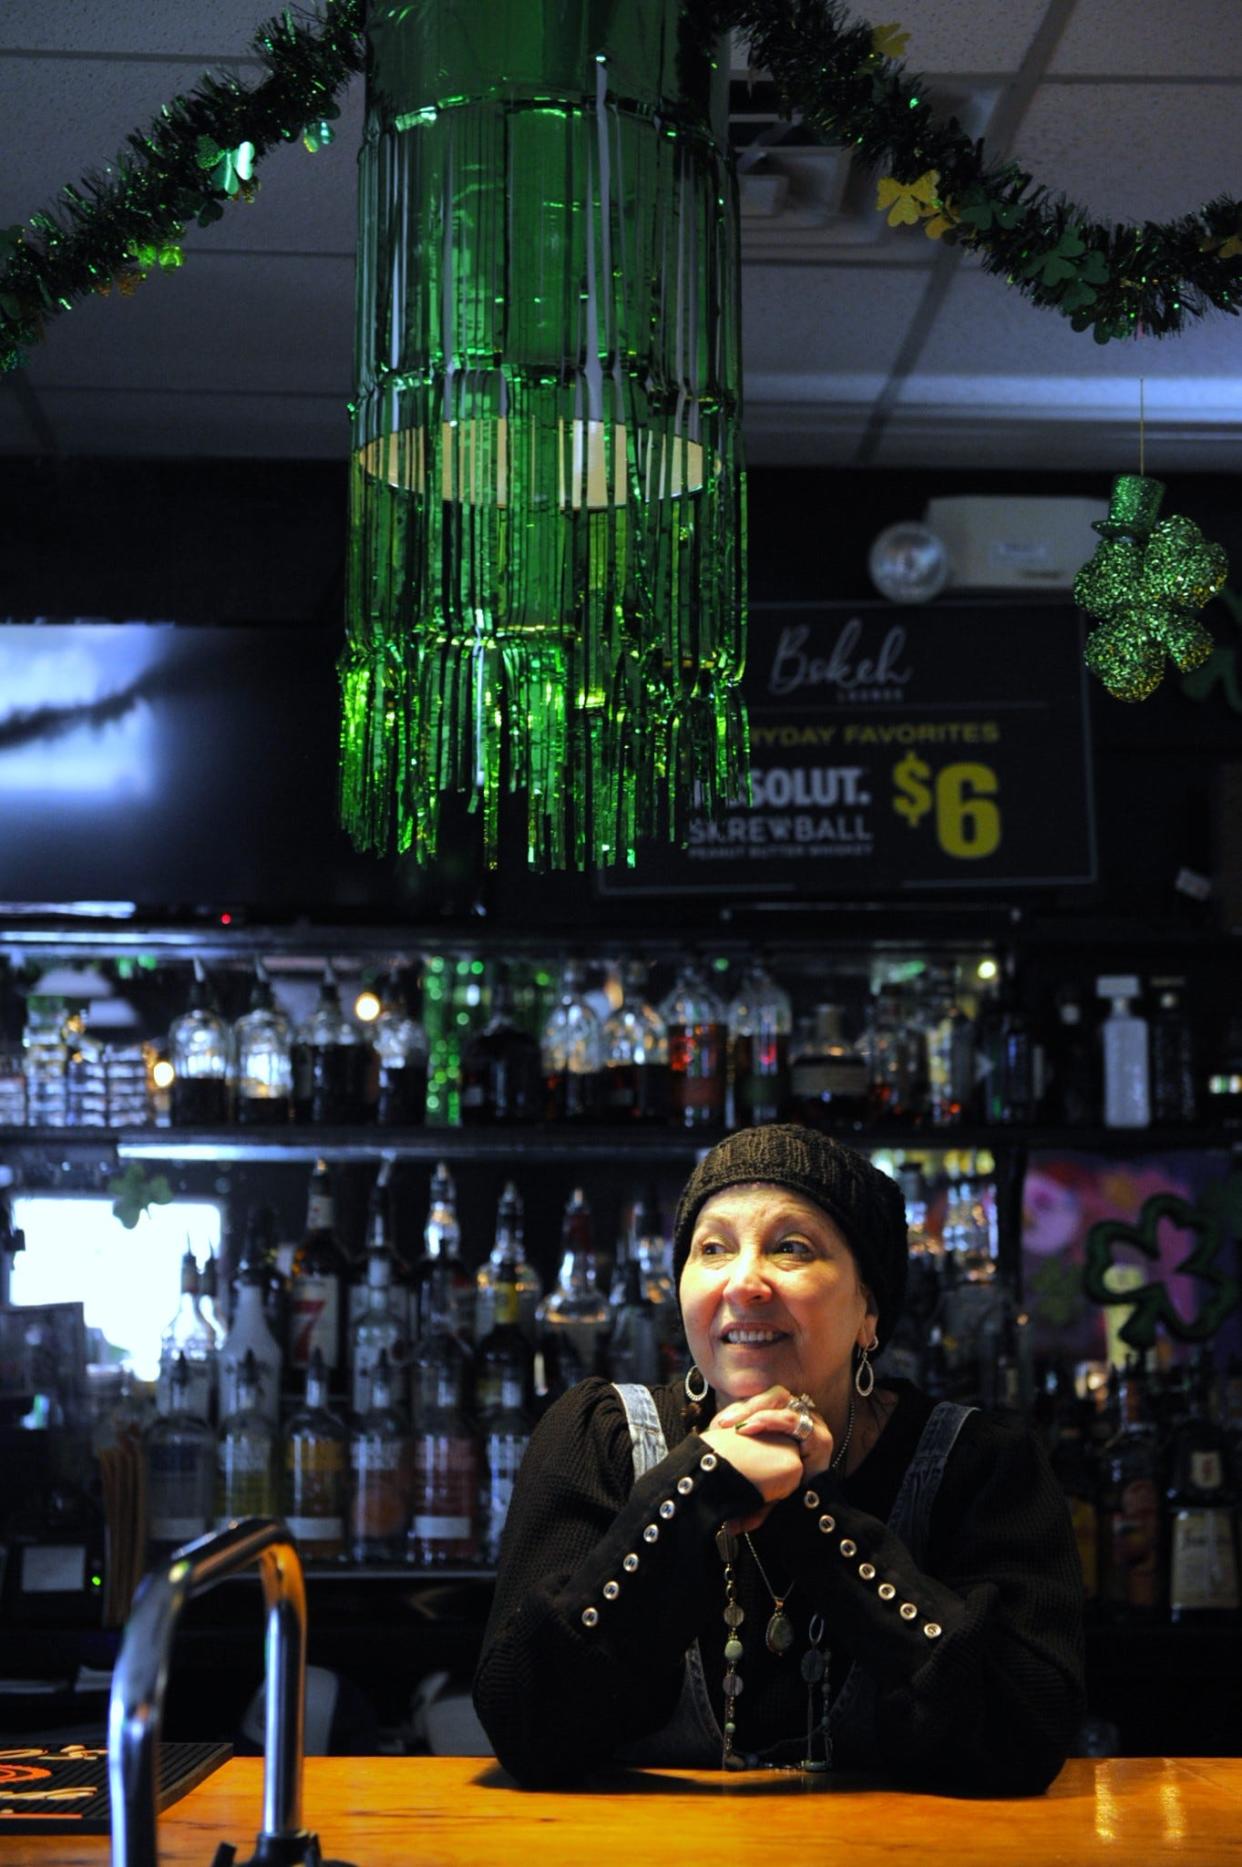 Jessica Nuffer, general manager of the Bokeh Lounge on Haynie's Corner, said she's waiting on more details before she makes concrete plans for happy hour specials or carry-out beverages after the passage of HB 1086.